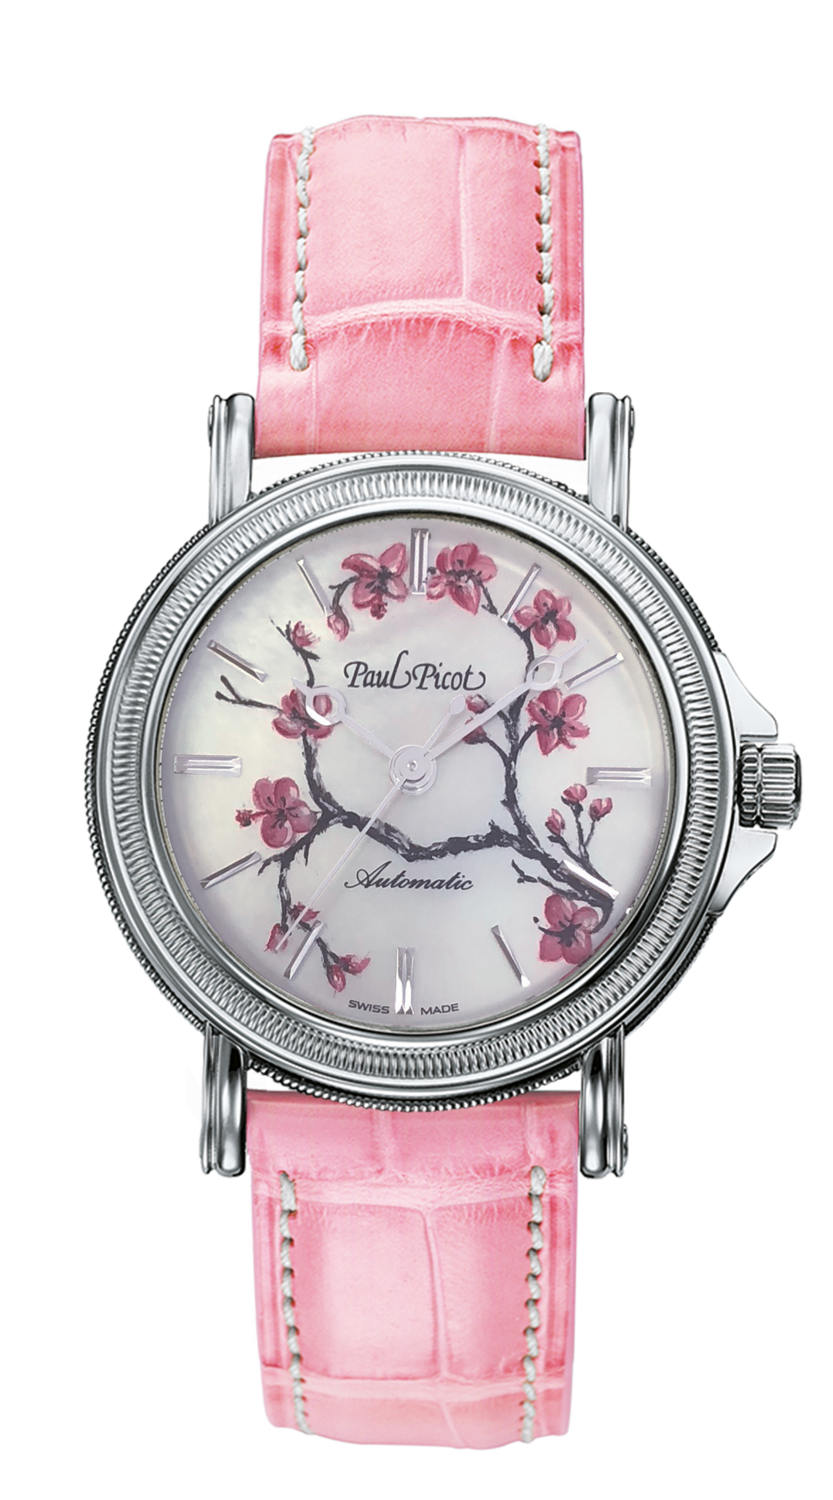 PAUL PICOT ATELIER LADY CHERRY BLOSSOM MOTHER OF PEARL LIMITED EDITION n°131 34mm LEATHER STRAP 4025.5NBS